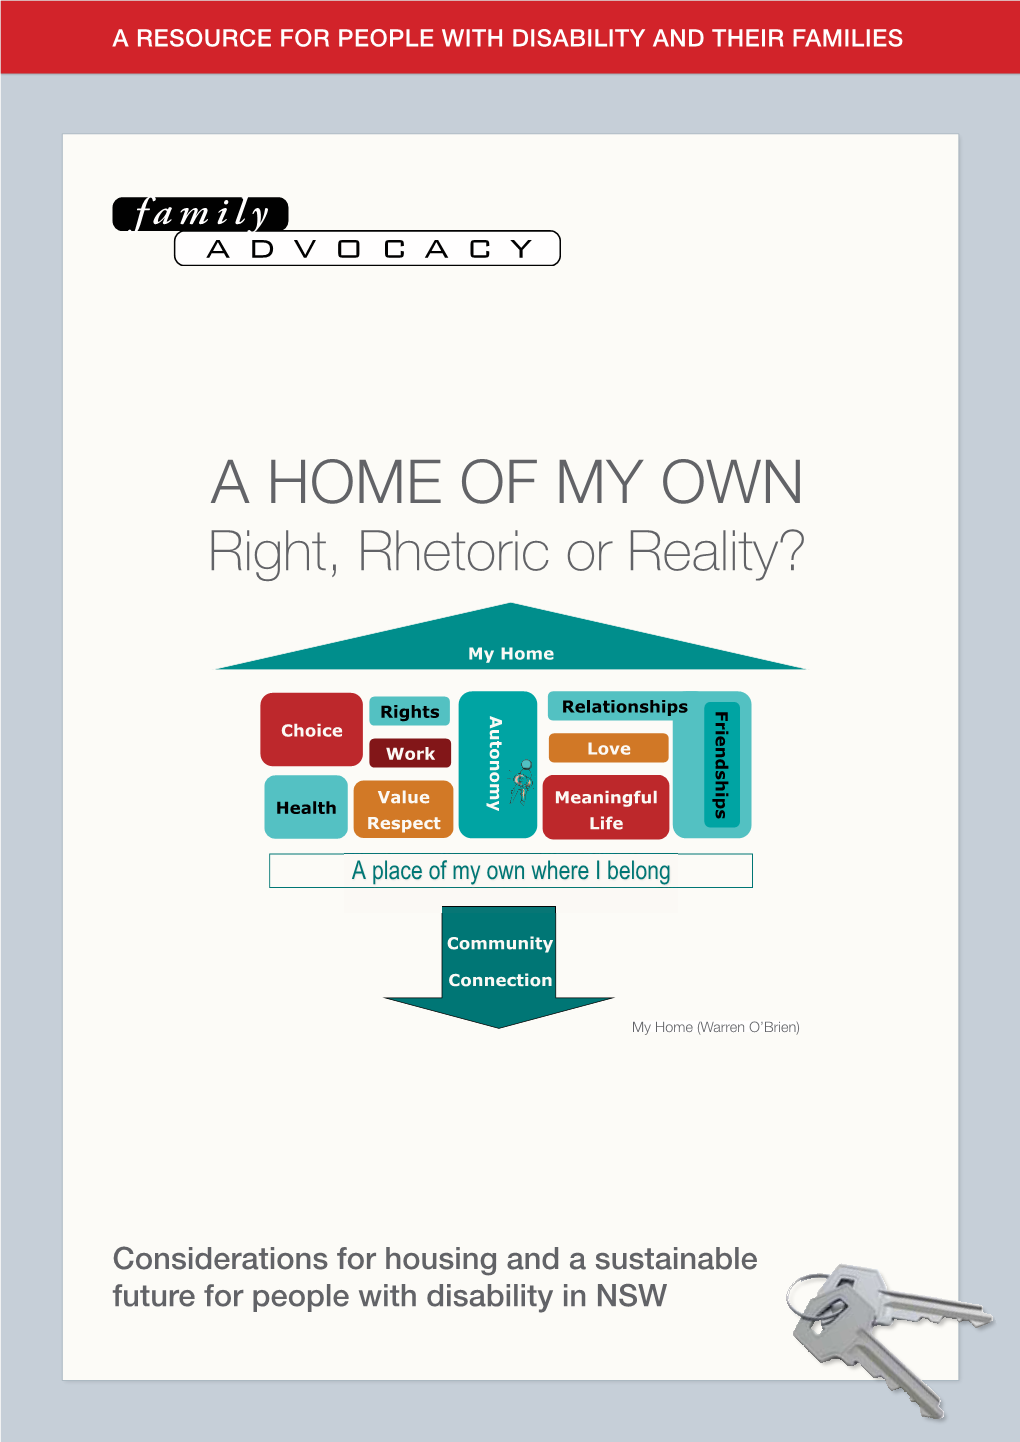 A Home of My Own: Right, Rhetoric Or Reality?